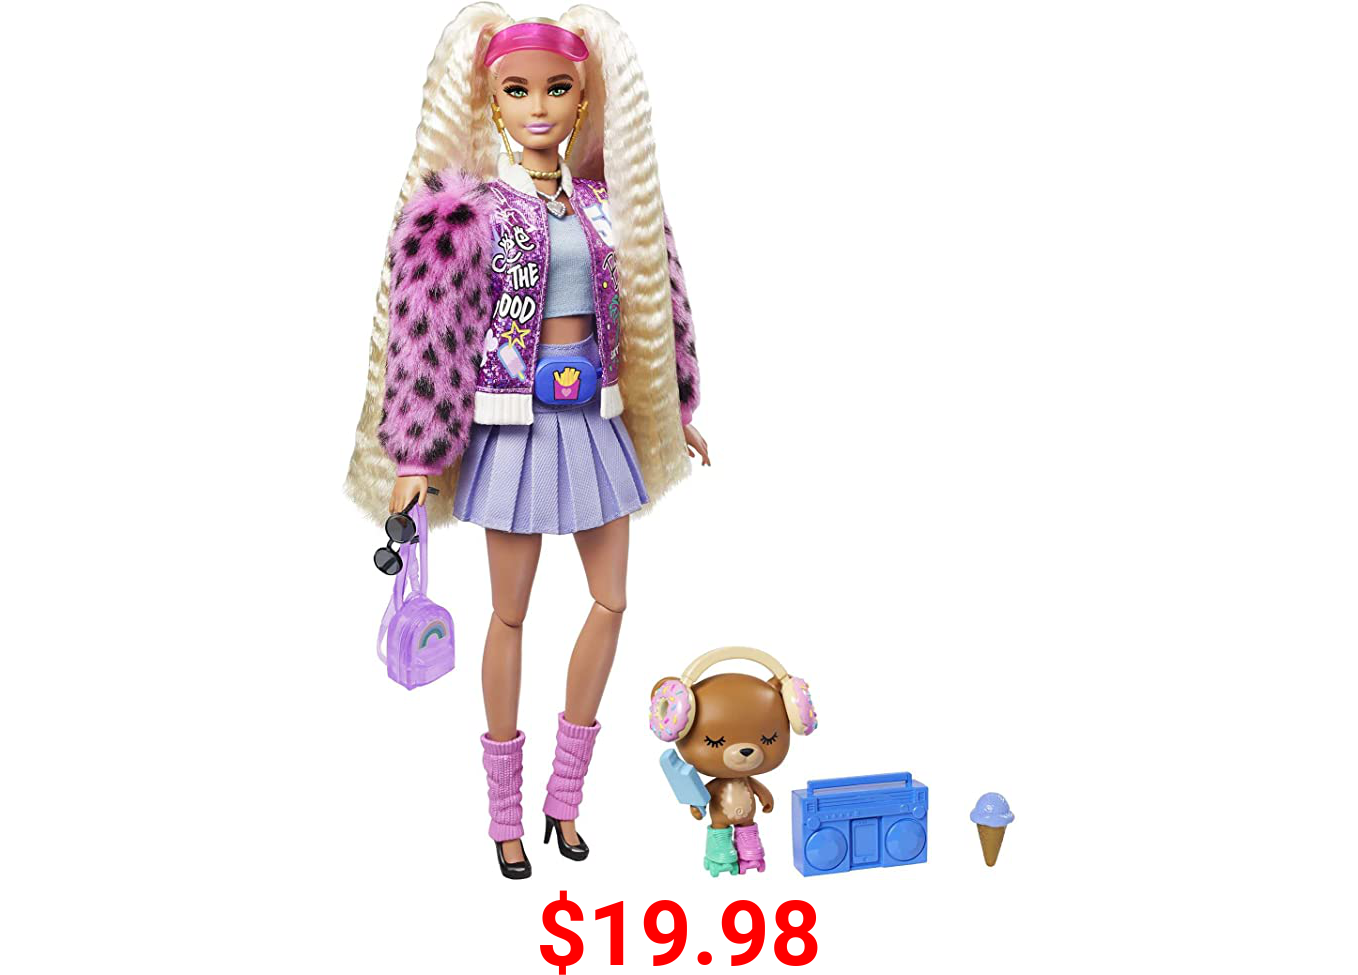 Barbie Extra Doll #8 in Pink Sparkly Varsity Jacket with Furry Arms & Pet Teddy Bear, Extra-Long Crimped Pigtails, Layered Outfit & Accessories, Multiple Flexible Joints